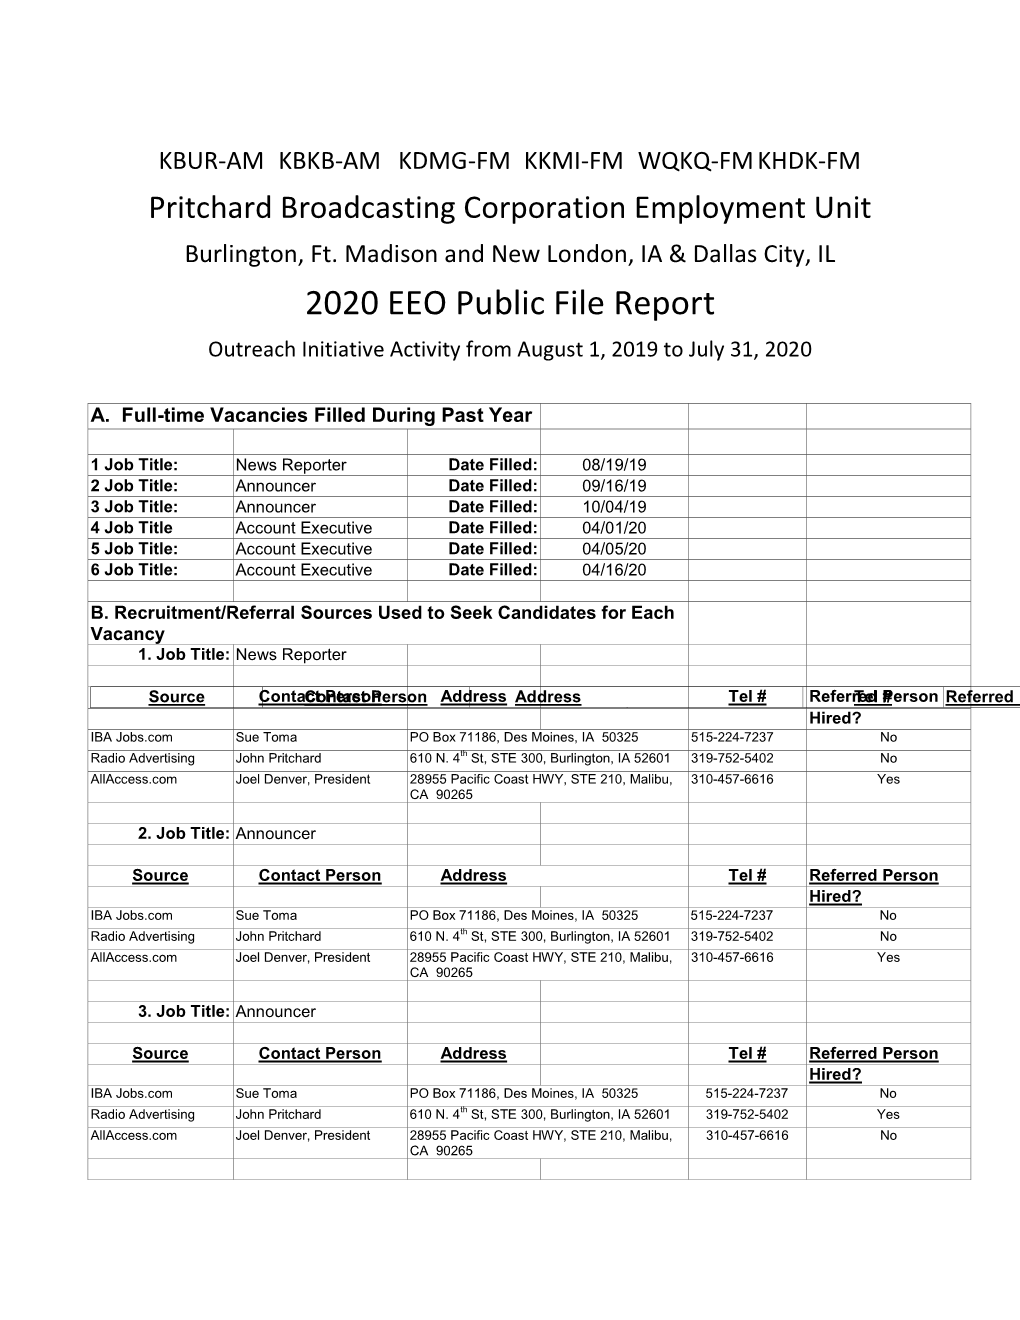 2020 EEO Public File Report Outreach Initiative Activity from August 1, 2019 to July 31, 2020